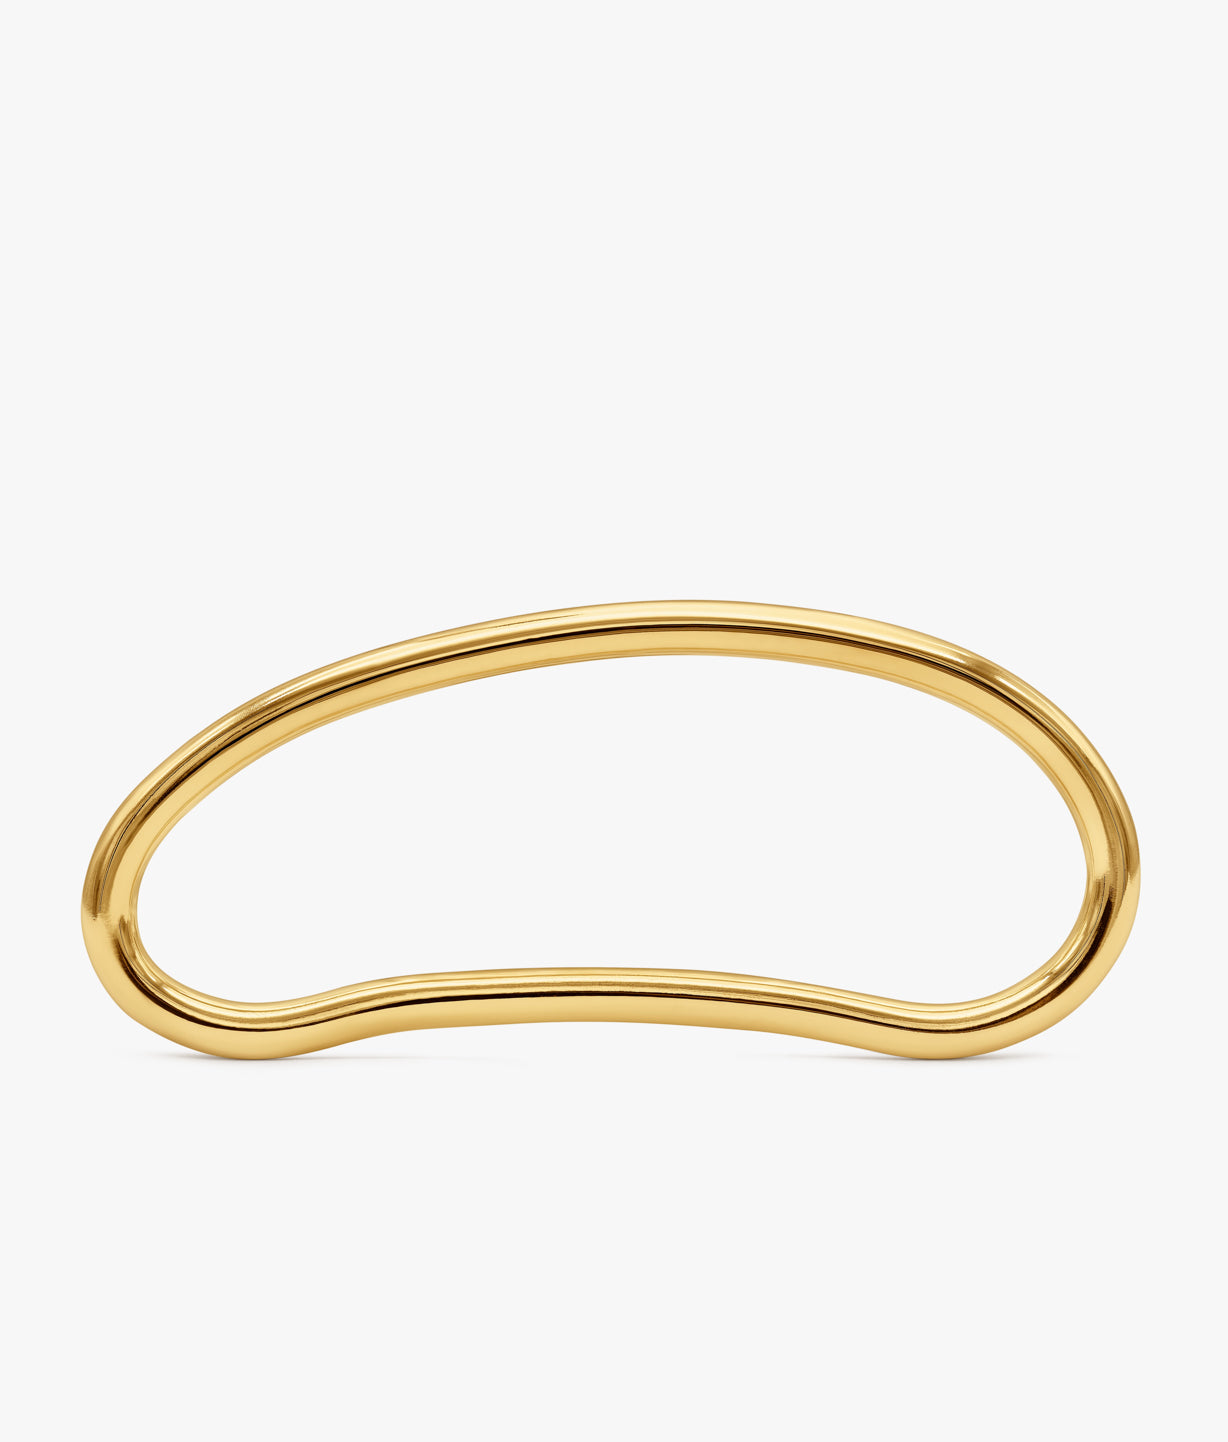 Gold Plated Silver Palm Cuff